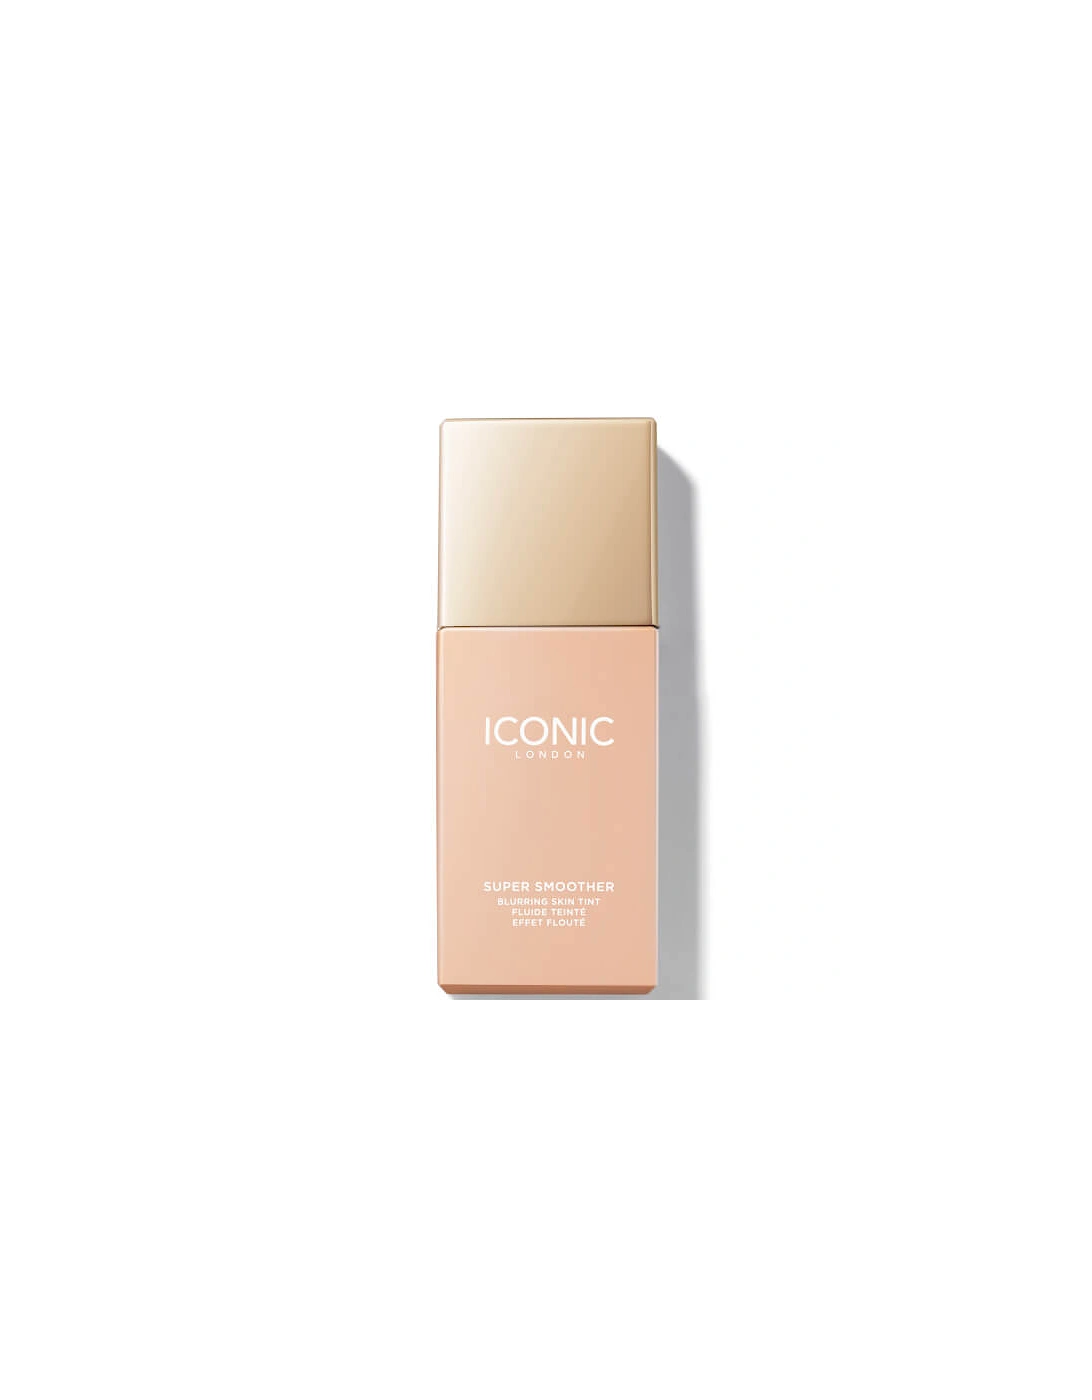 Super Smoother Blurring Skin Tint - Cool Fair, 2 of 1